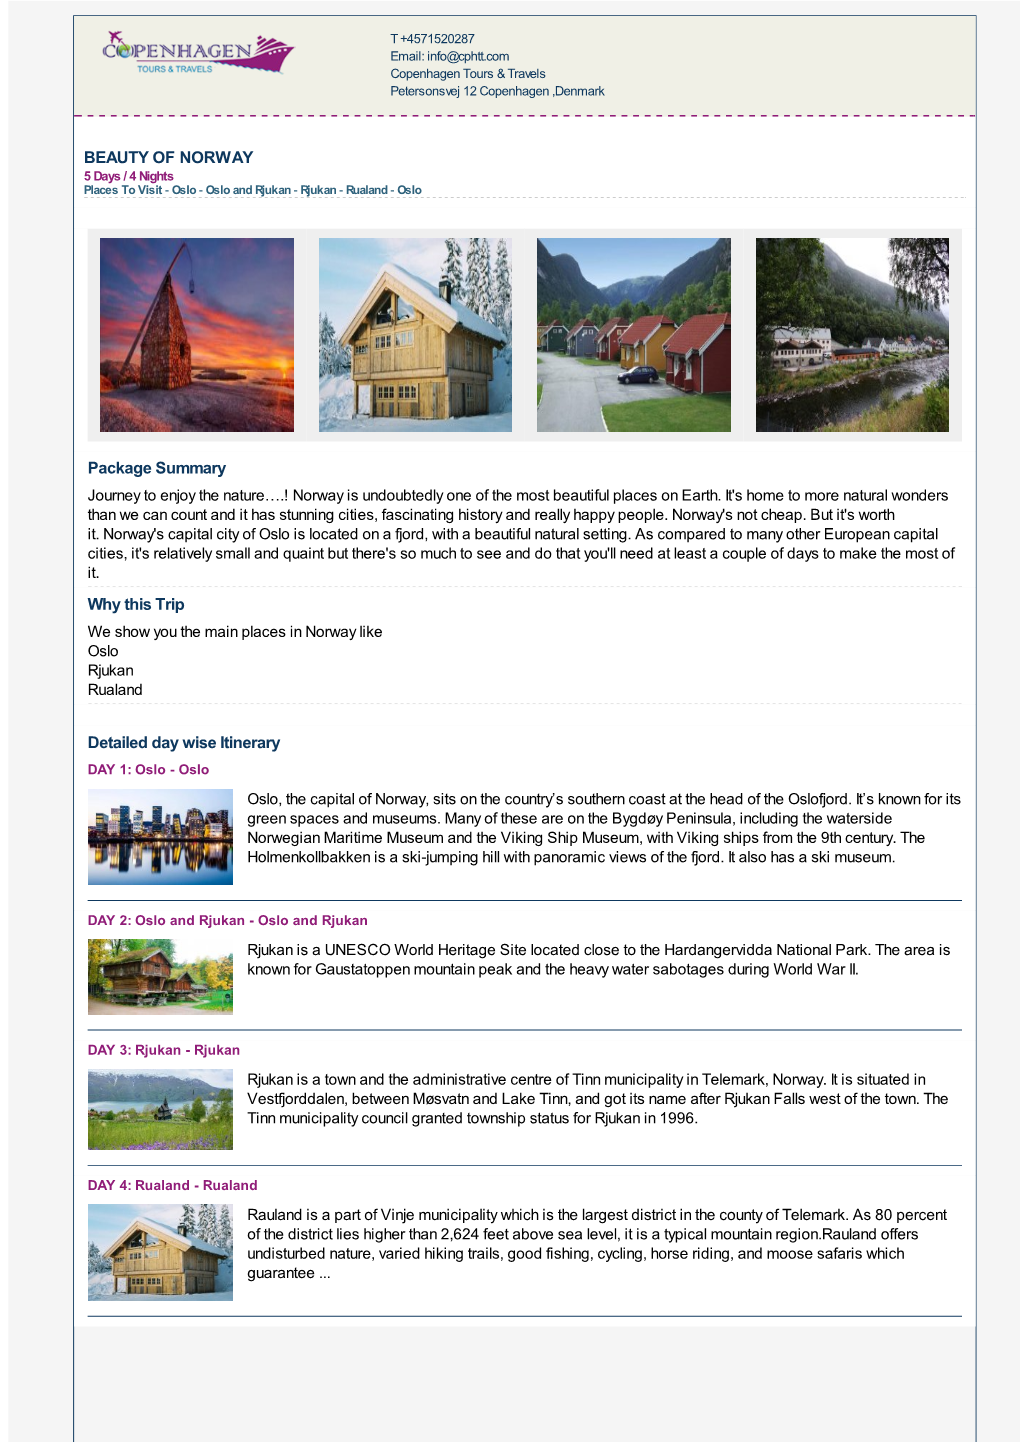 BEAUTY of NORWAY Package Summary Why This Trip Detailed